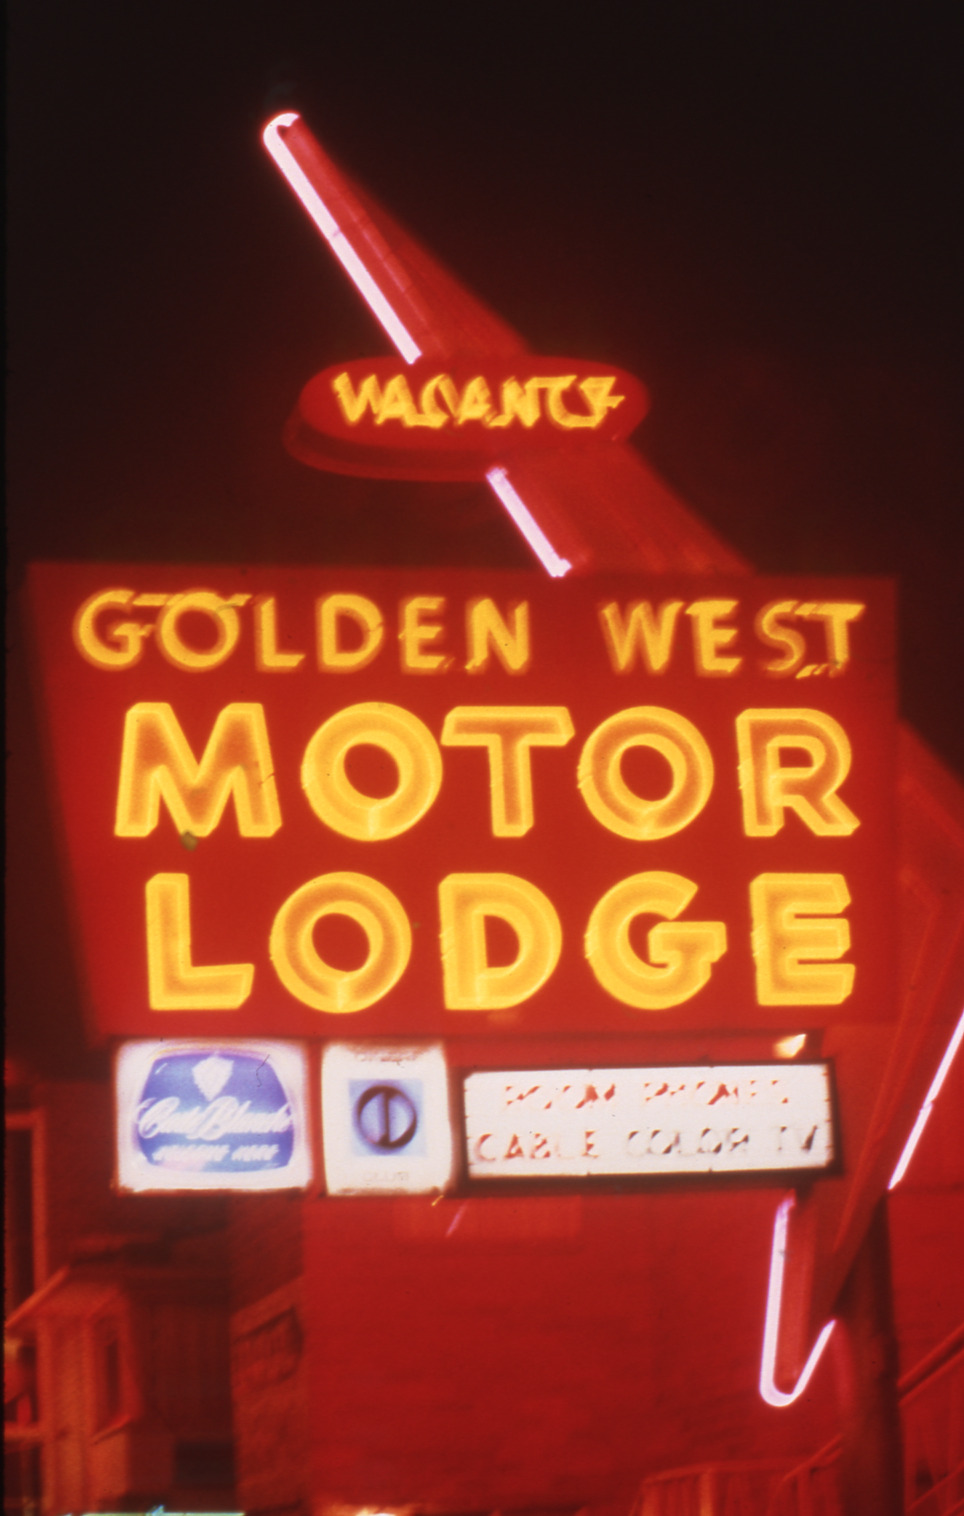 Golden West Motor Lodge mounted sign, Reno, Nevada: photographic print